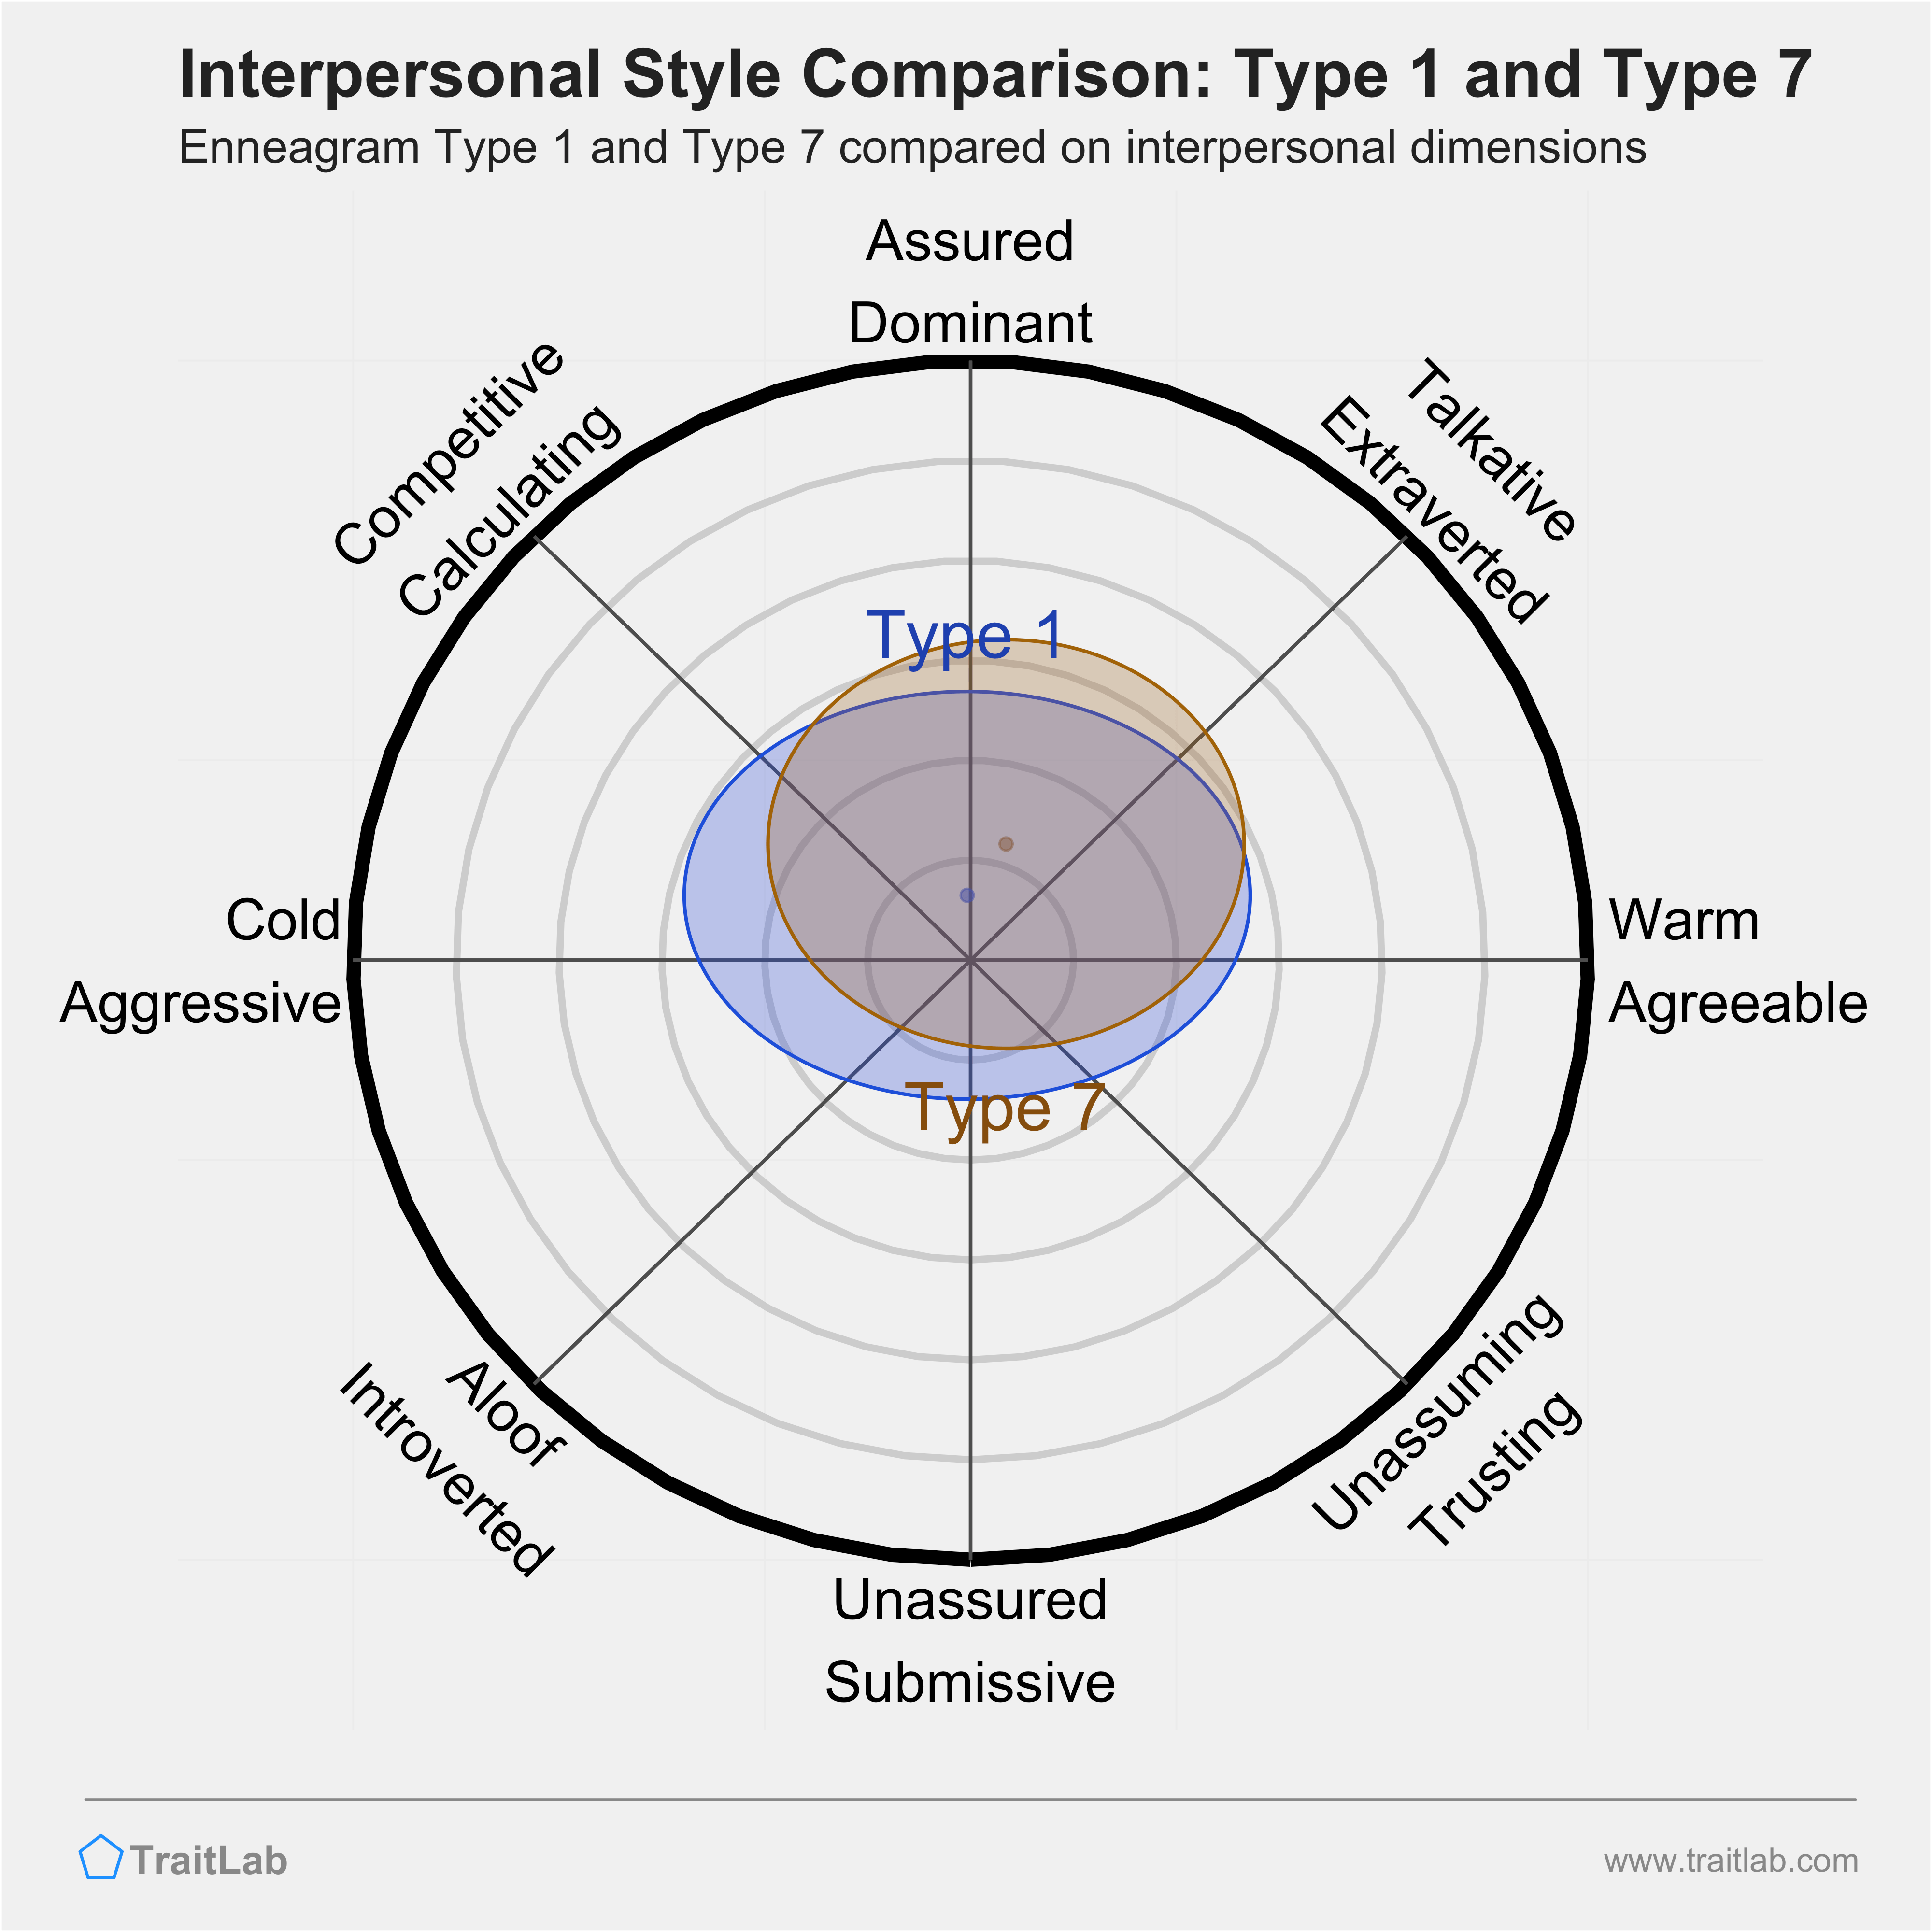 Enneagram Type 1 and Type 7 comparison across interpersonal dimensions